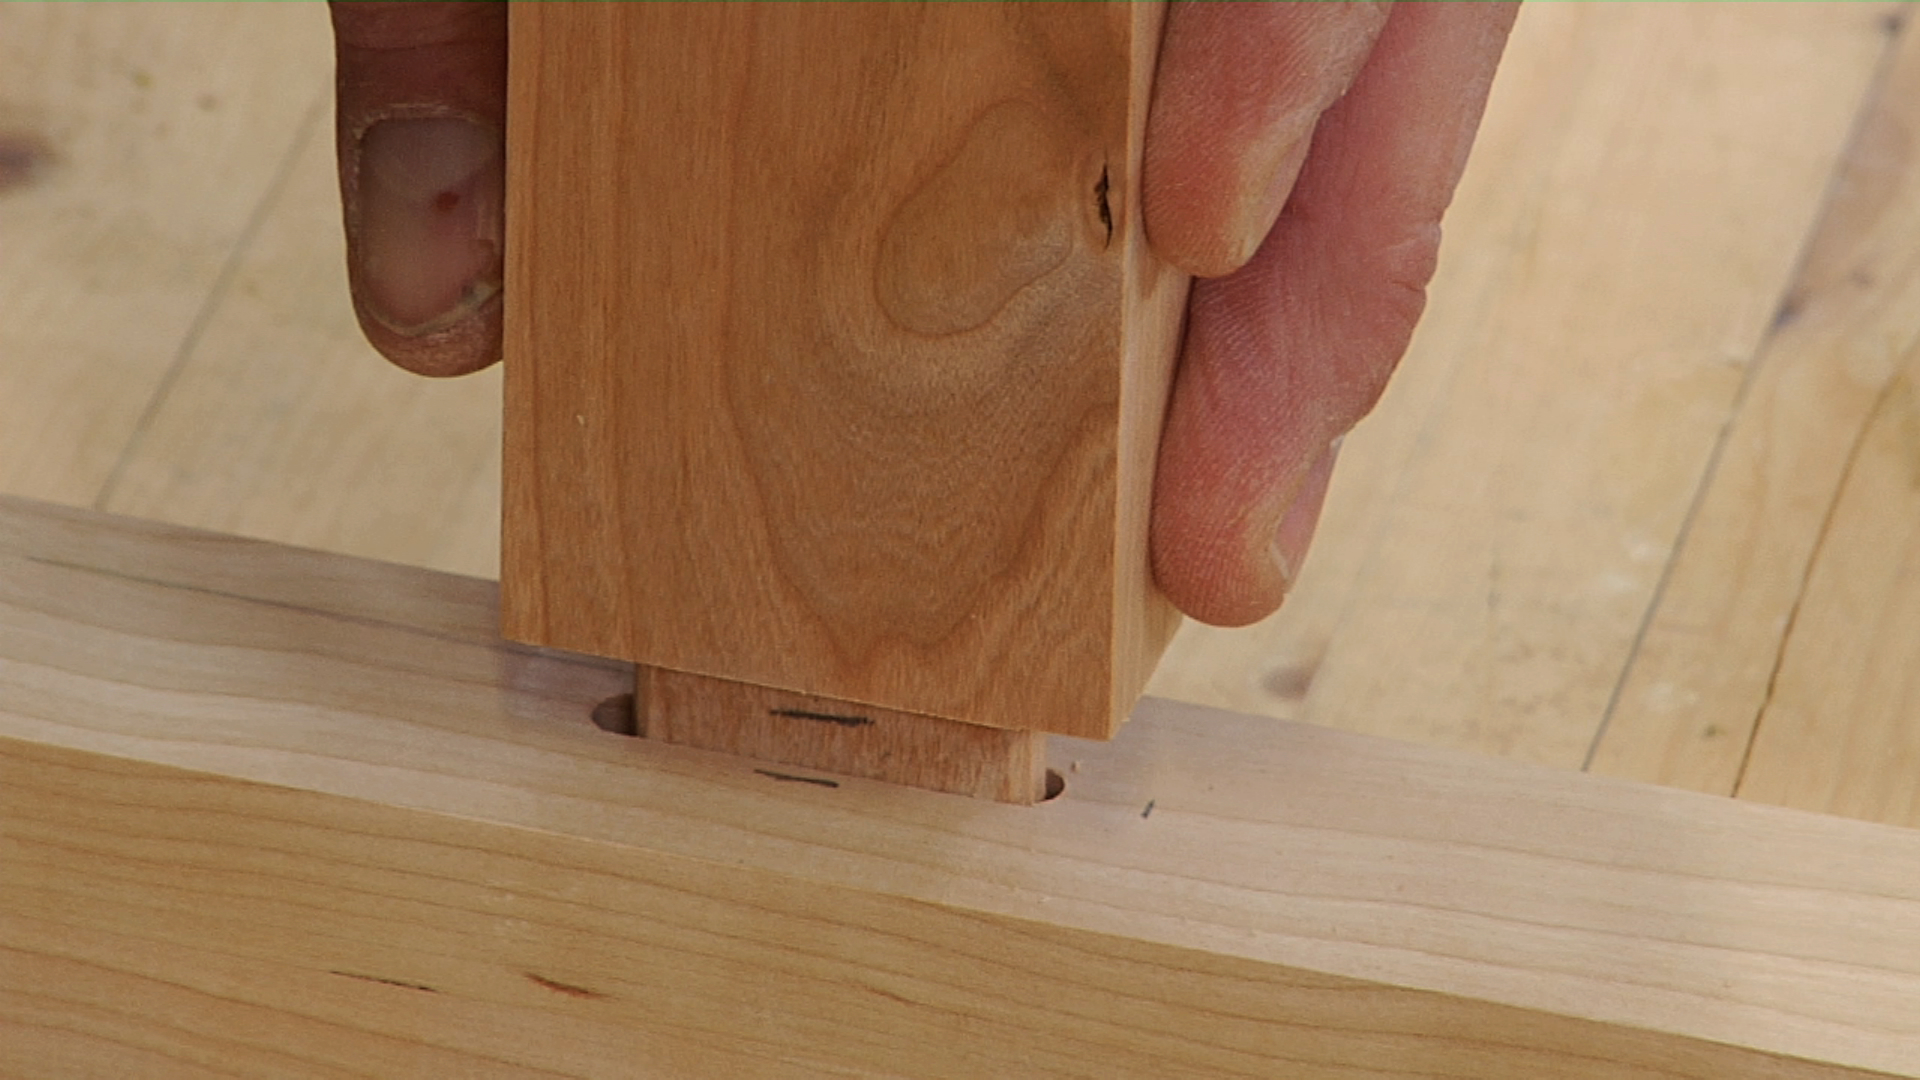 Session 4: Joinery